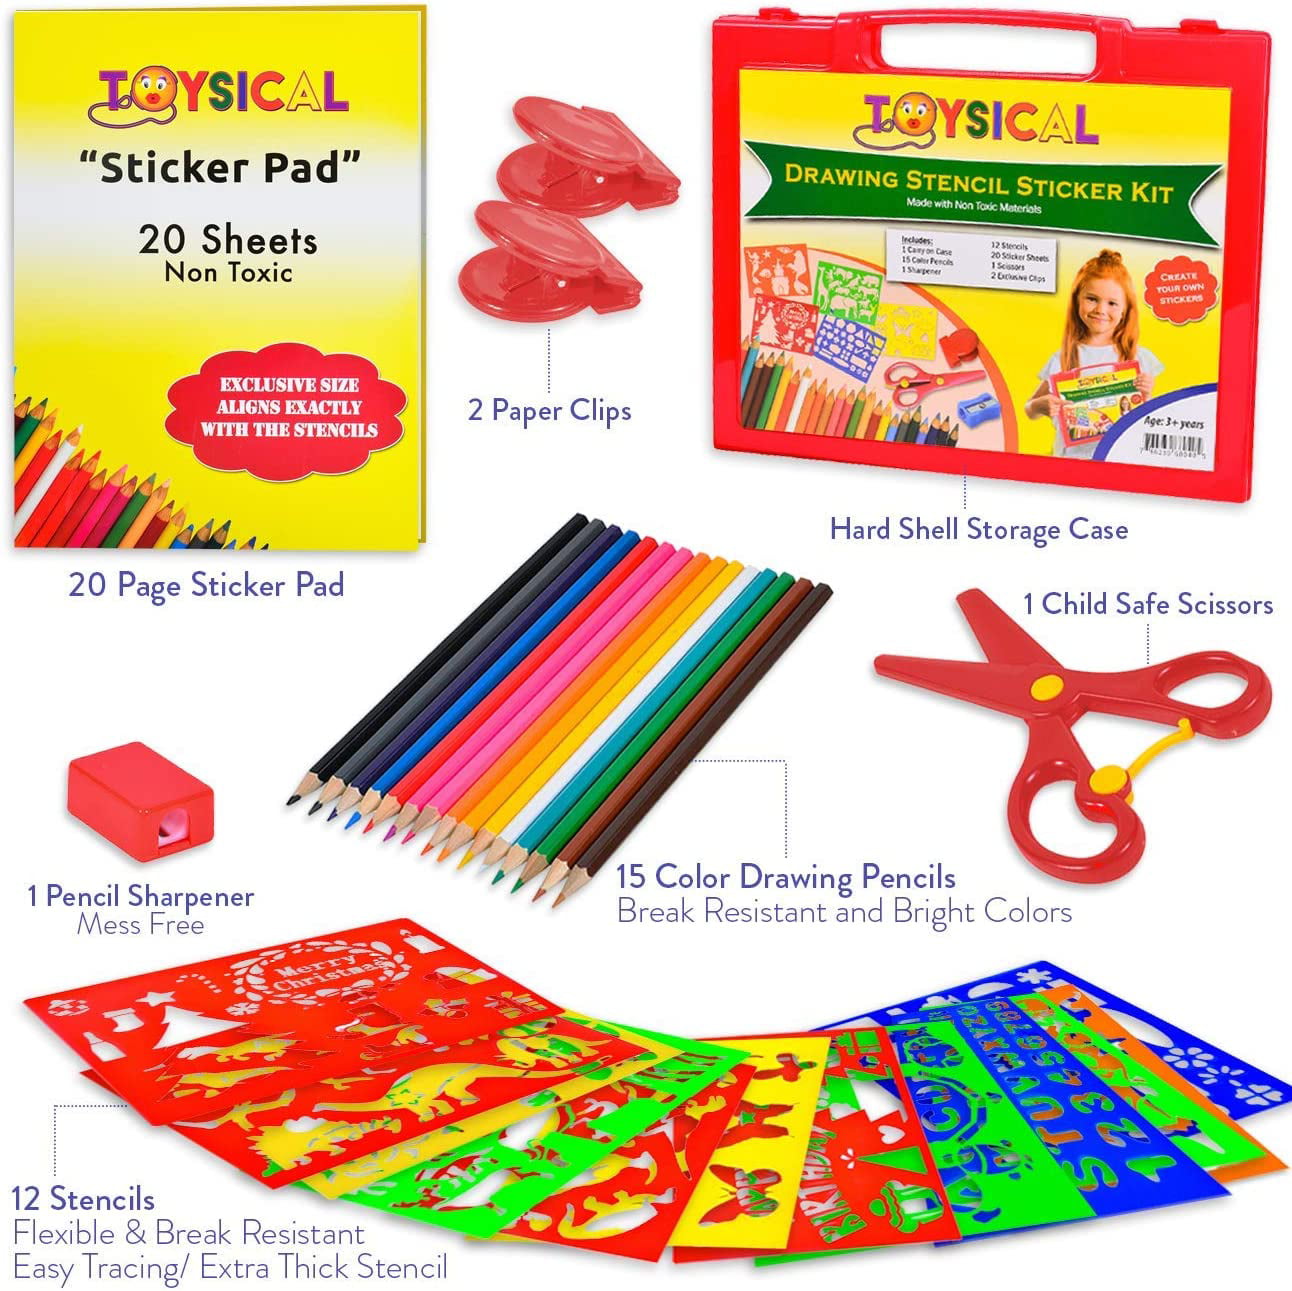 Drawing Stencils for Kids Kit & Carry Case – – Child-Safe, Non-Toxic  Stencil Set with 300 Shapes, Colored Pencils, Paper, Etc. – Travel Art  Supplies for Creativity, Learning, Fun by Art with